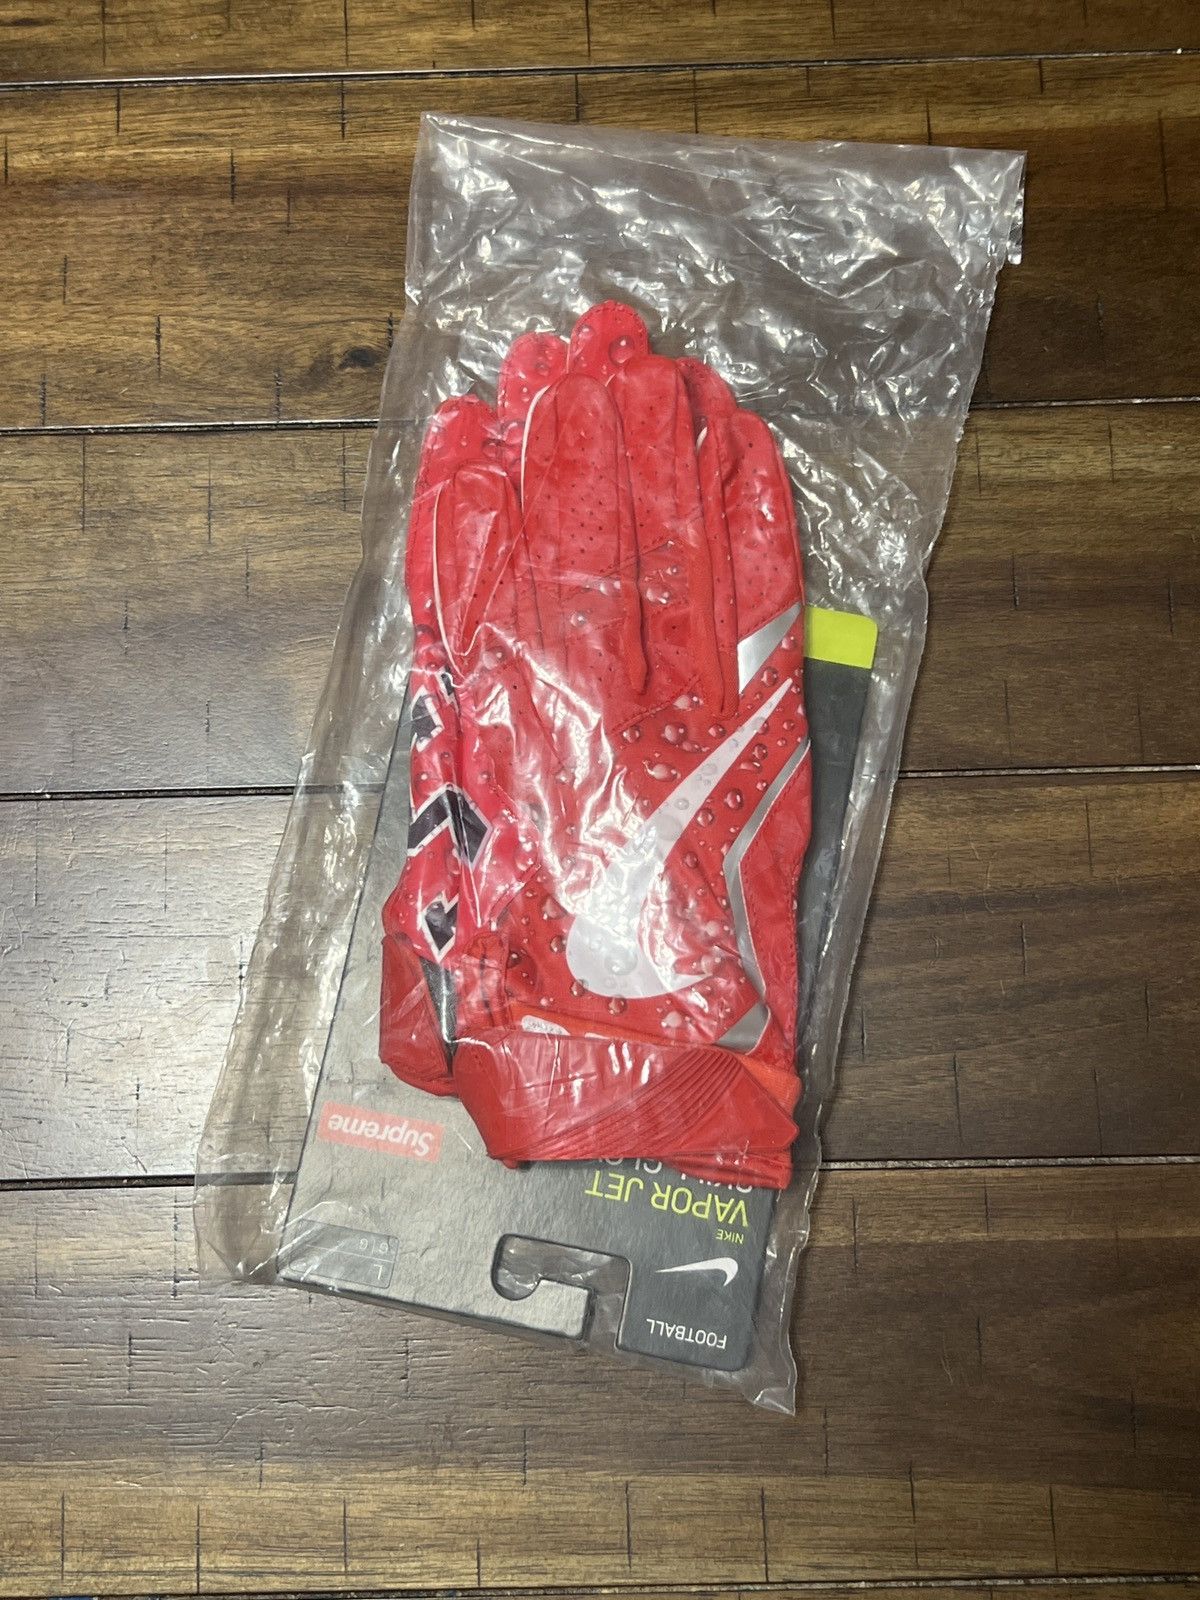 SAINT on X: Supreme Nike Vapor Jet 4.0 Football Gloves for roughly $20  over retail! Red-->  Black-->    / X